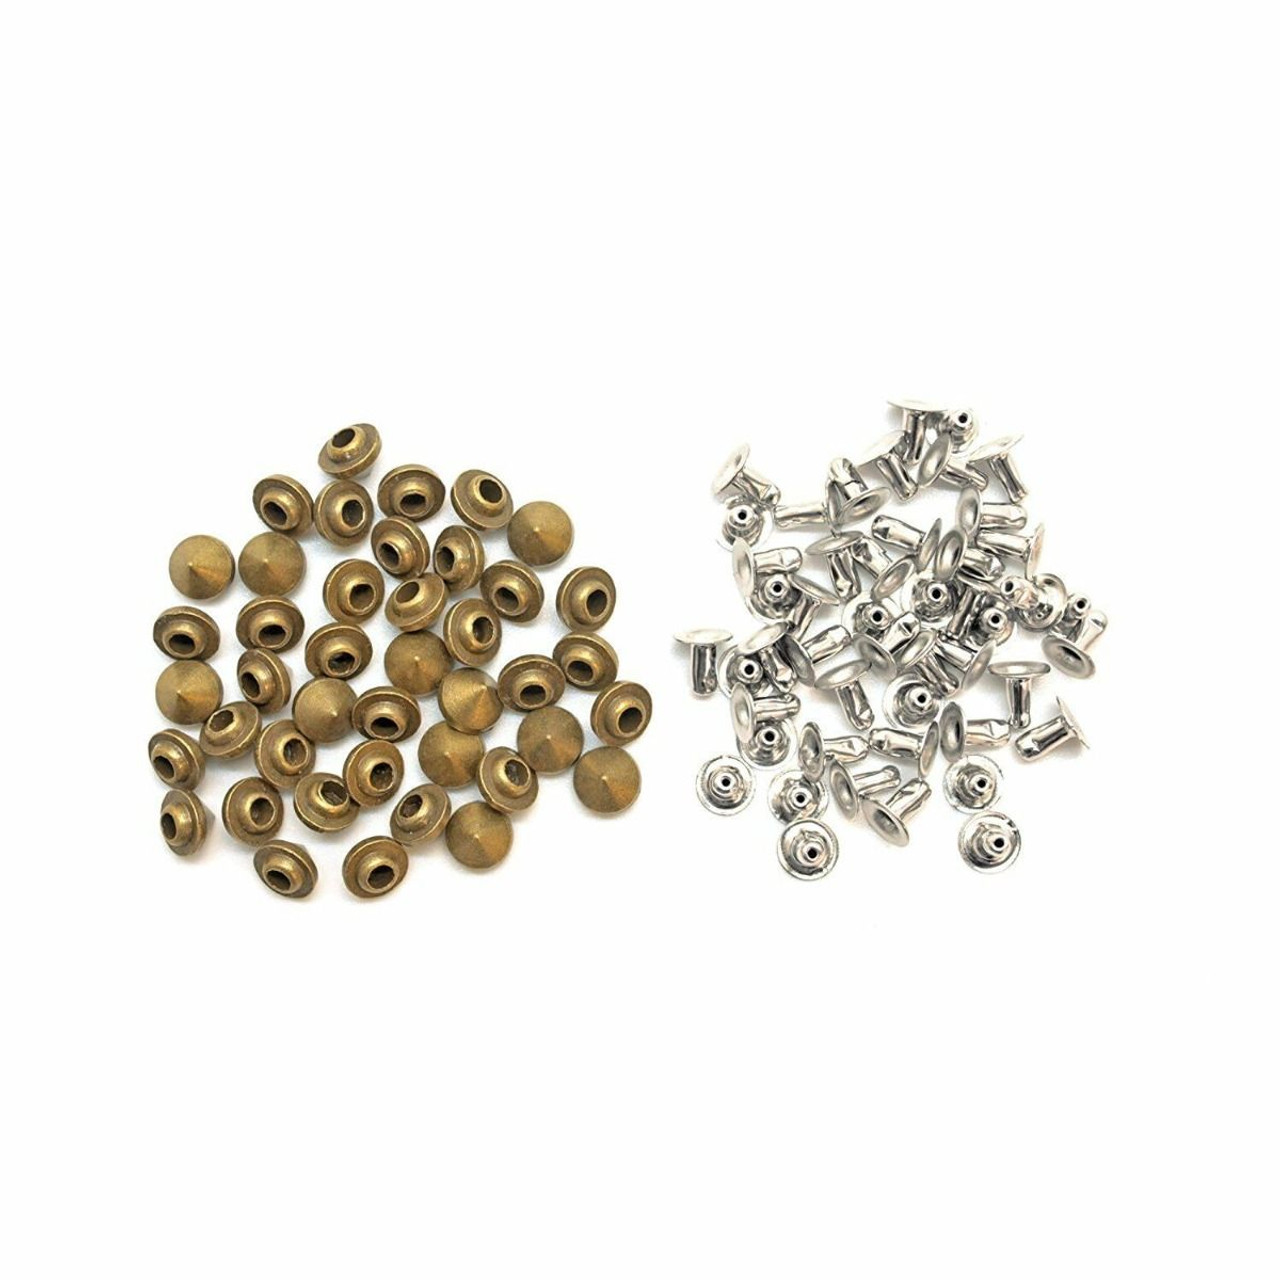 Solid Brass Cone Punk Press Studs with Pins - 100pcs